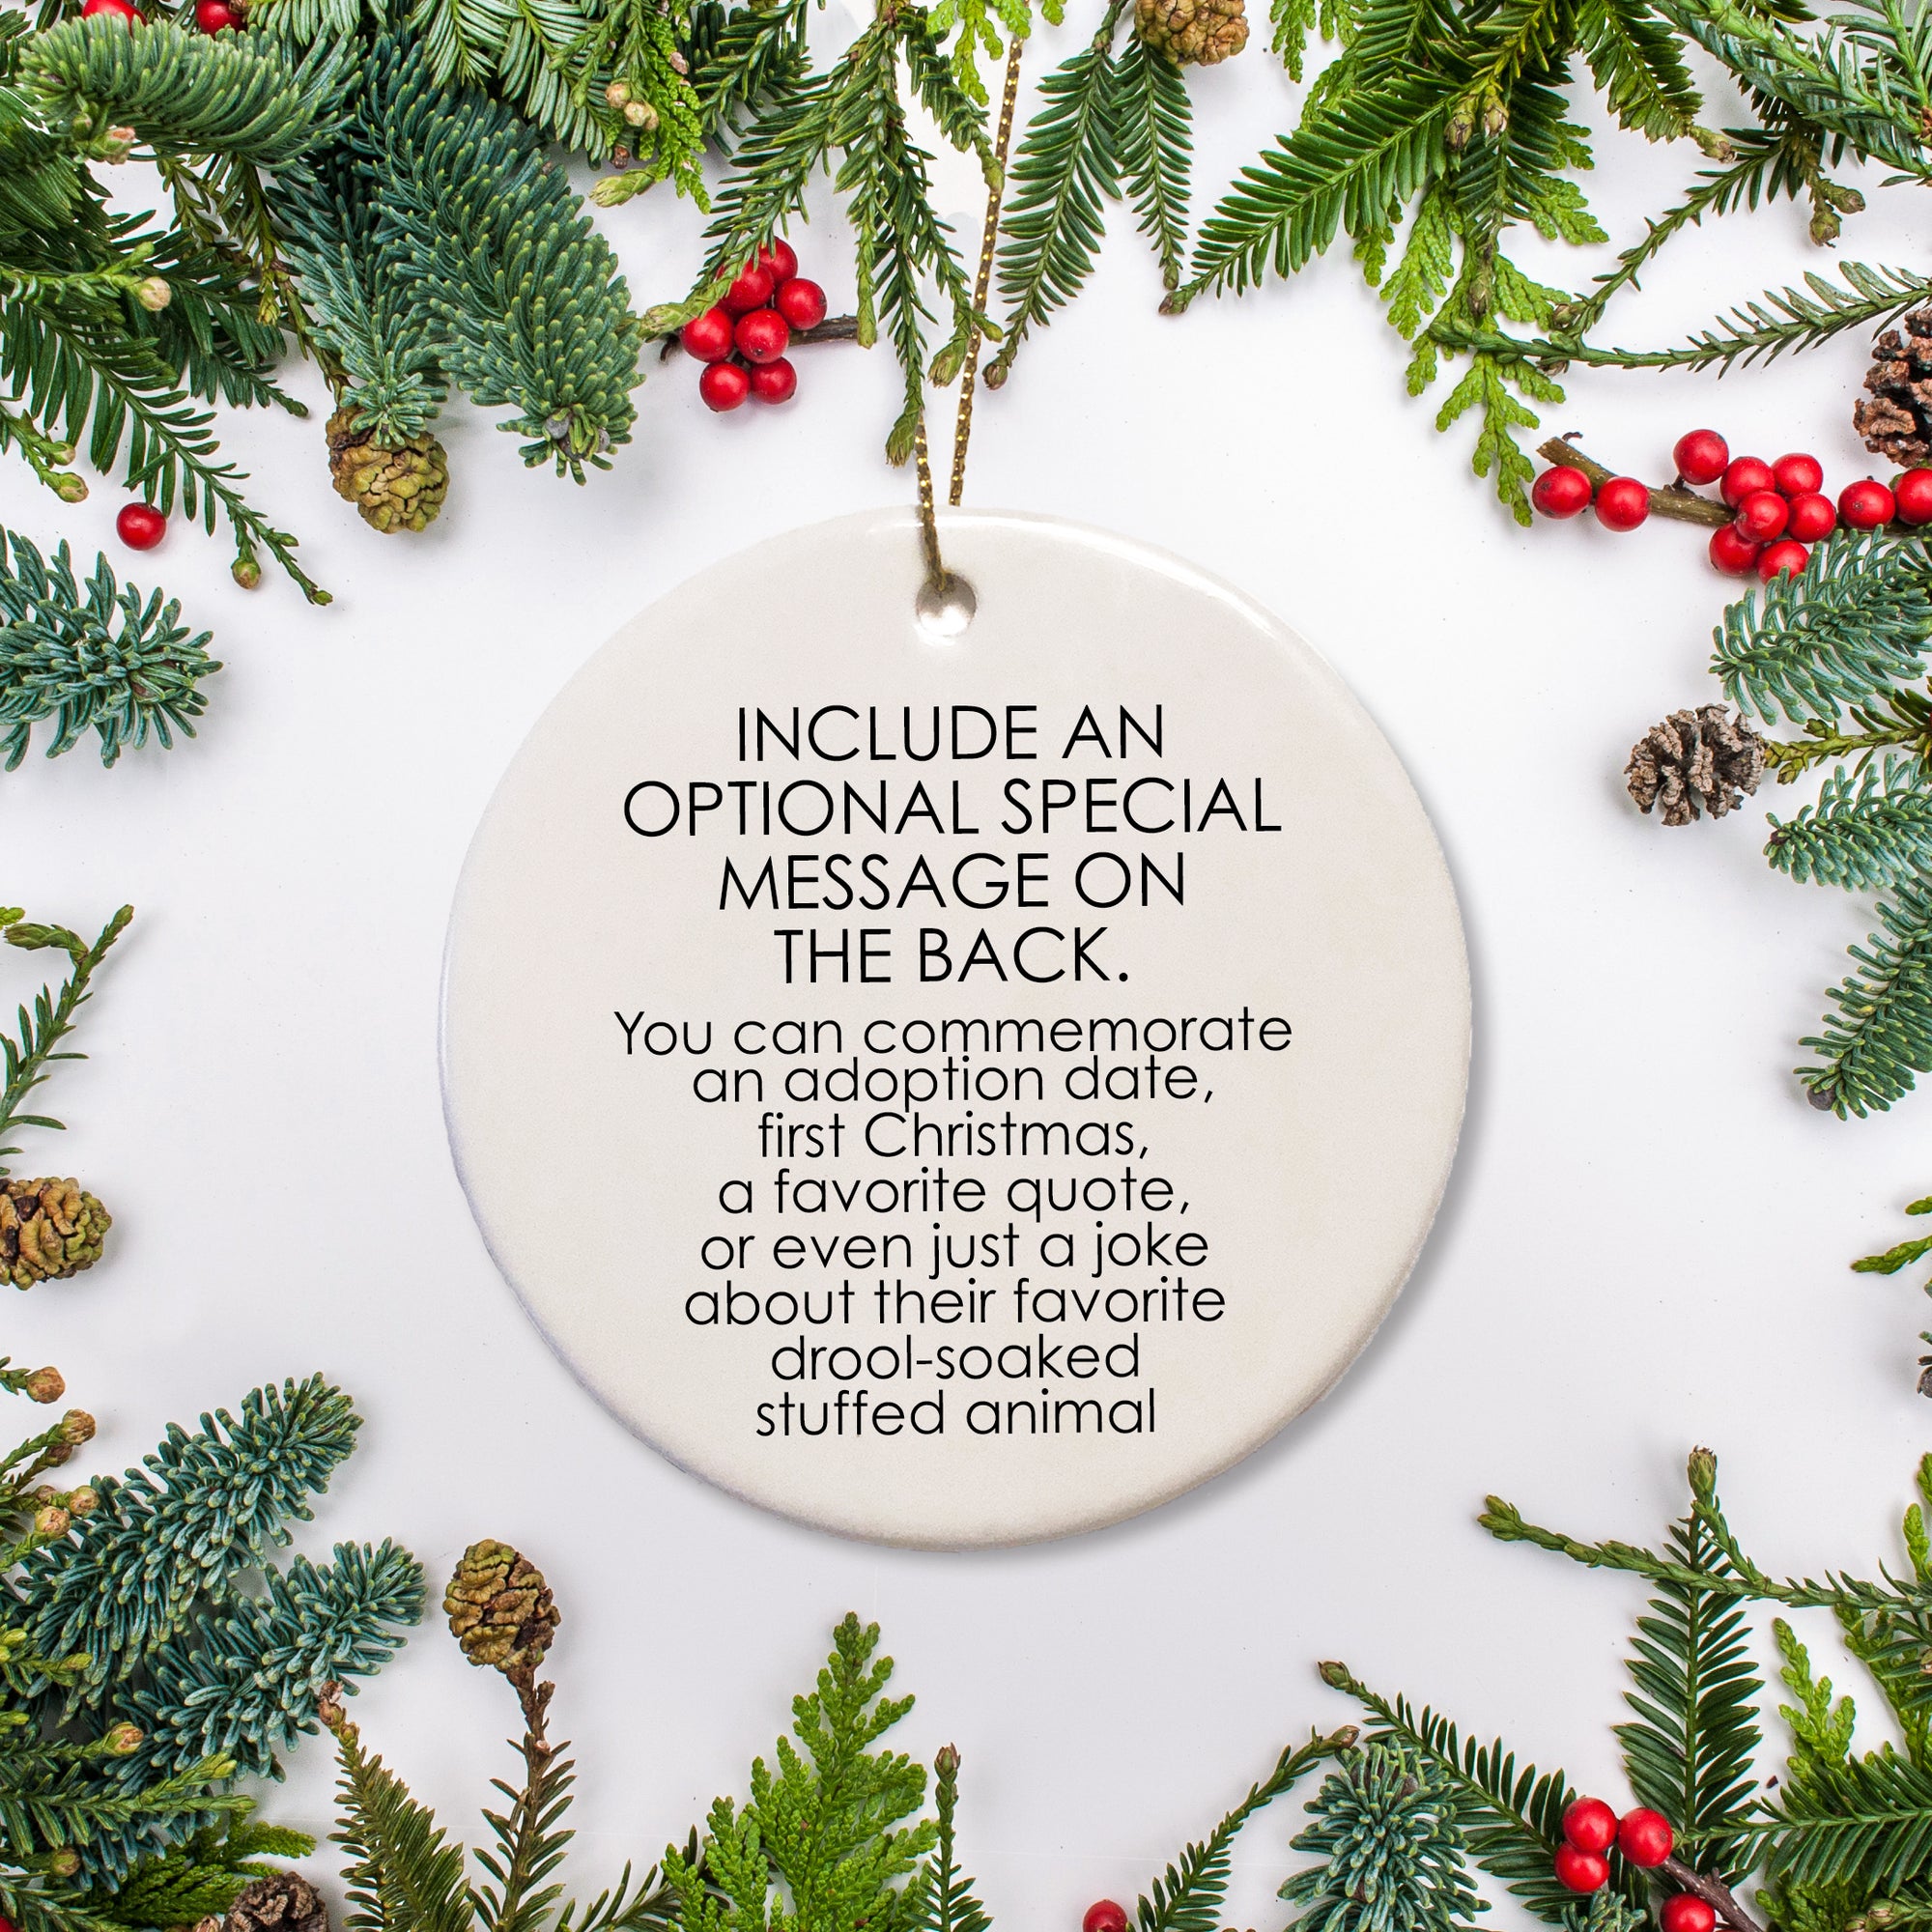 The back of the ornament gives the option to include a special message such as the adoption date, a favorite quote, or a favorite memory of your weimeraner.